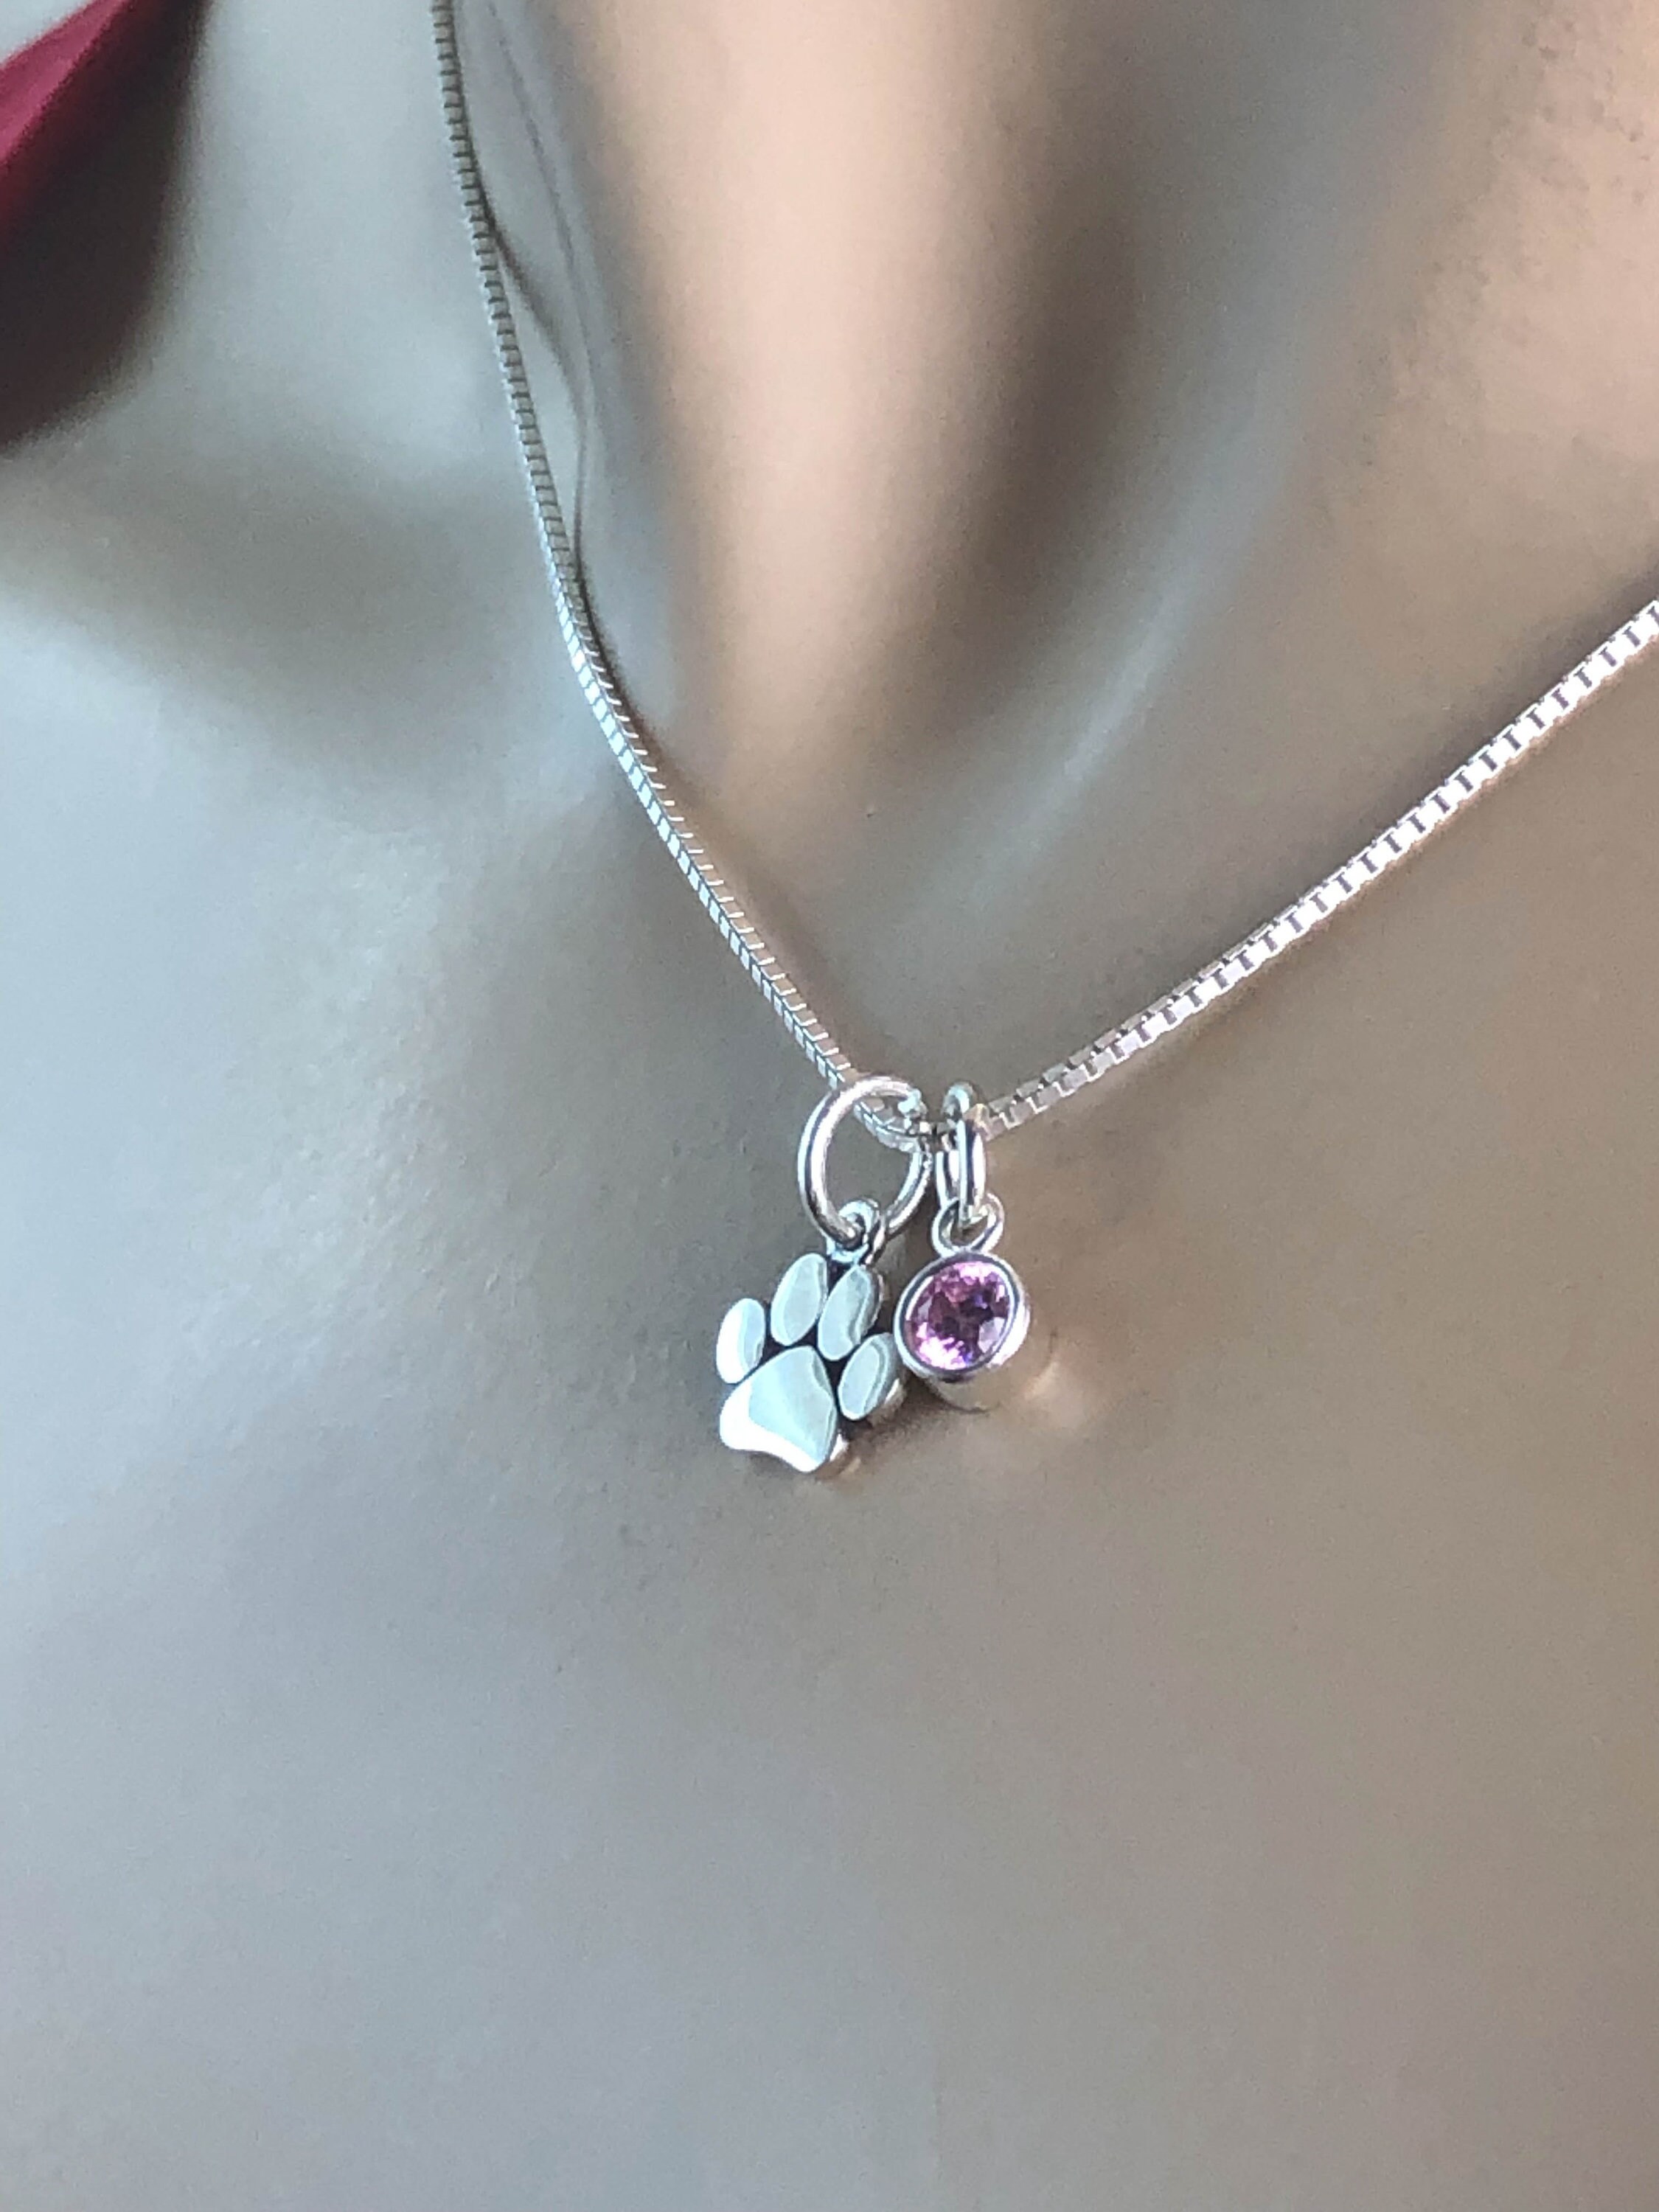 Paw Print Necklace Sterling Silver Paw Print Pendant Family - Etsy